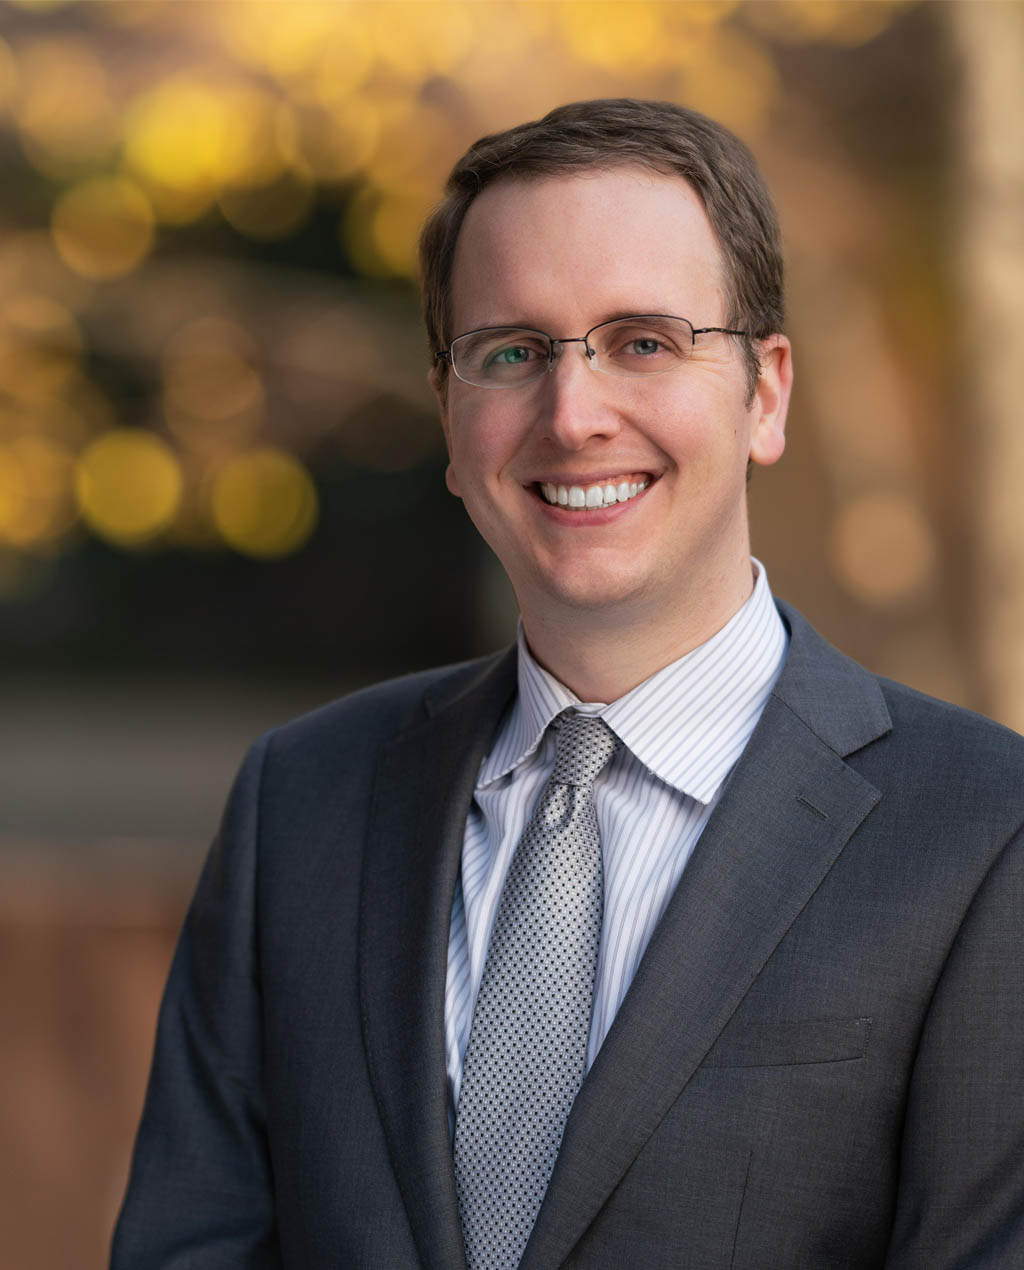 Business Law and Patent Attorney Kyle B. Straughan